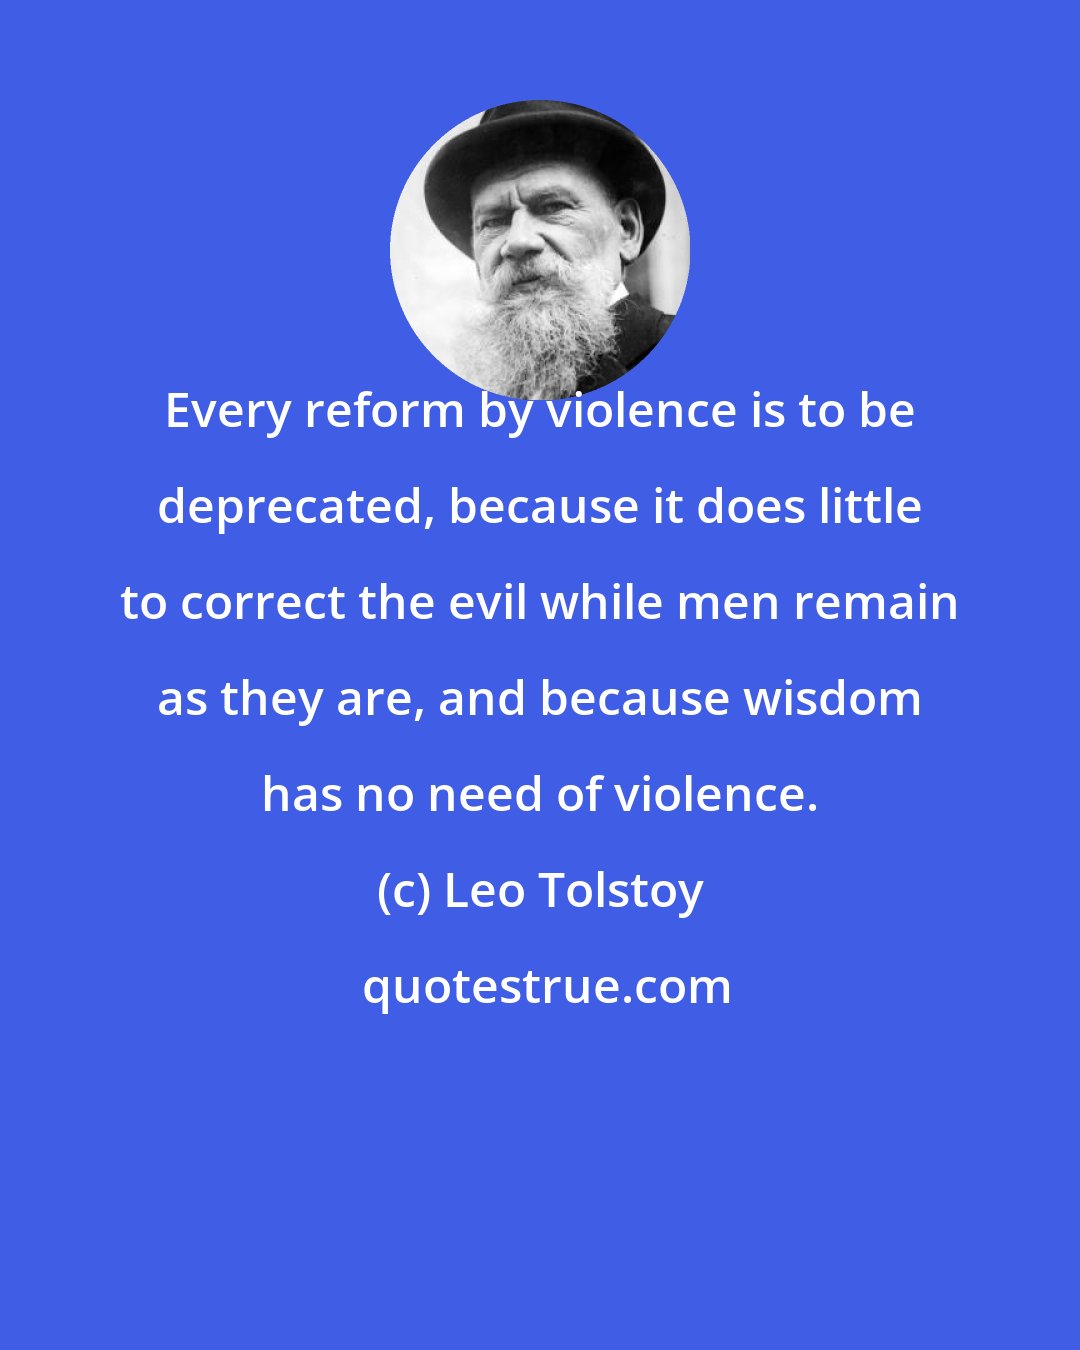 Leo Tolstoy: Every reform by violence is to be deprecated, because it does little to correct the evil while men remain as they are, and because wisdom has no need of violence.